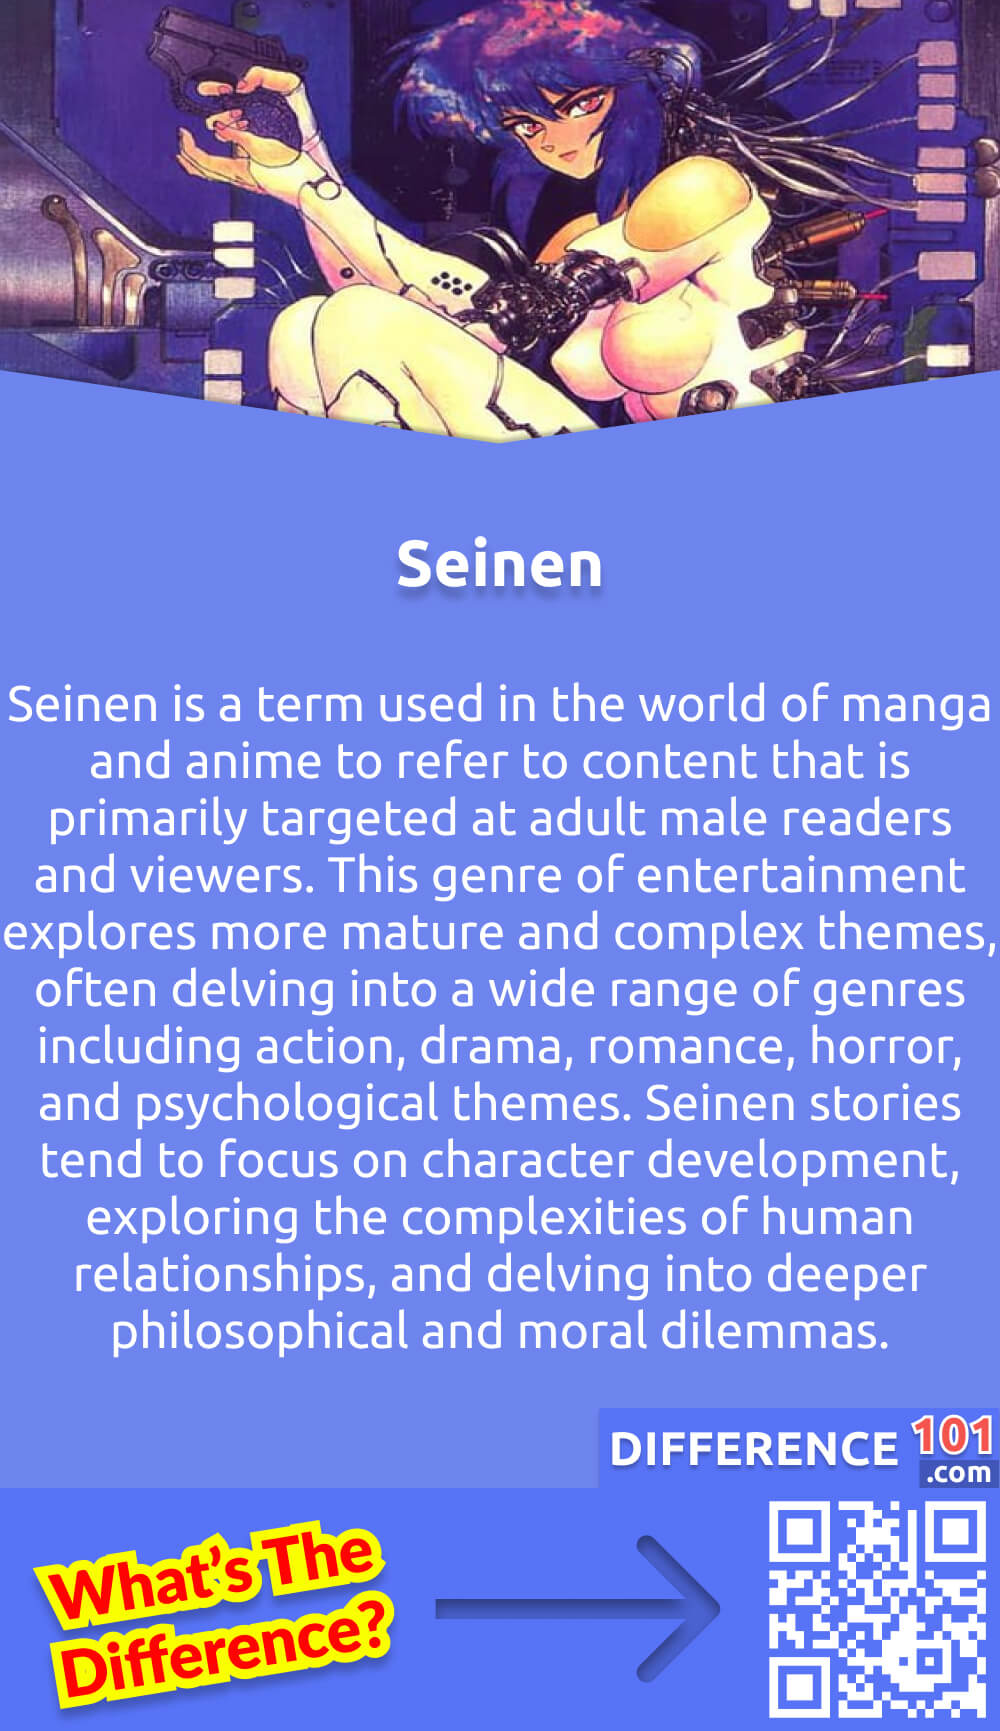 What Is Seinen? Seinen is a term used in the world of manga and anime to refer to content that is primarily targeted at adult male readers and viewers. This genre of entertainment explores more mature and complex themes, often delving into a wide range of genres including action, drama, romance, horror, and psychological themes. Seinen stories tend to focus on character development, exploring the complexities of human relationships, and delving into deeper philosophical and moral dilemmas. The art style in seinen manga is often more detailed and can be quite graphic at times, depicting violence, sexuality, and mature content. Seinen is a popular and respected genre that offers a more nuanced and layered experience for adult fans of manga and anime.